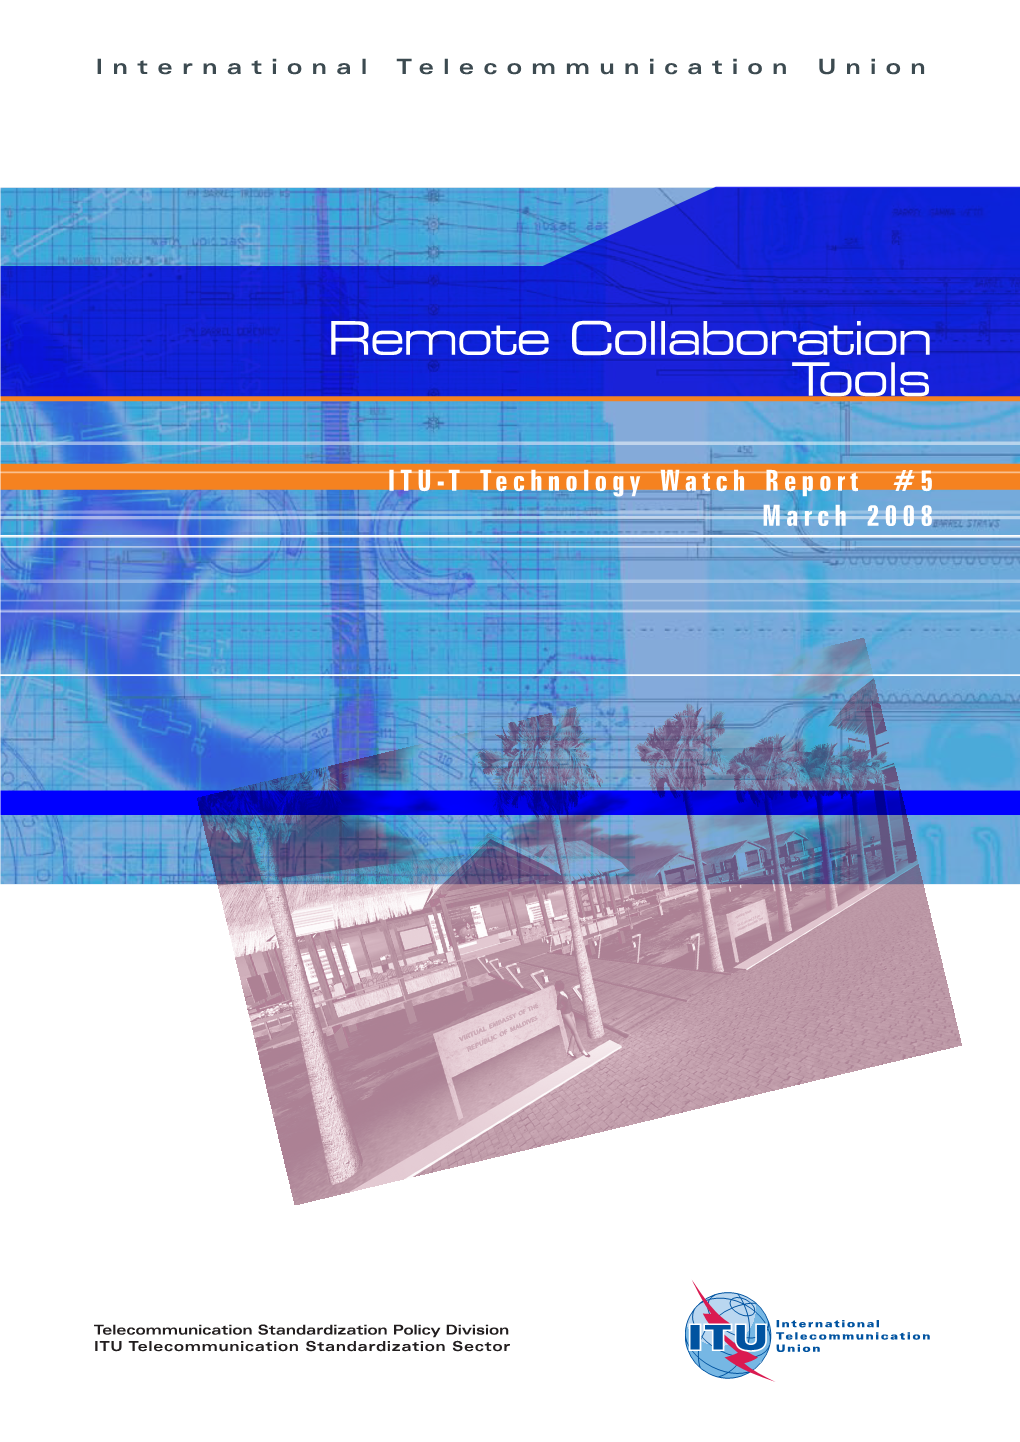 Remote Collaboration Tools ITU-T Technology Watch Report #5 March 2008